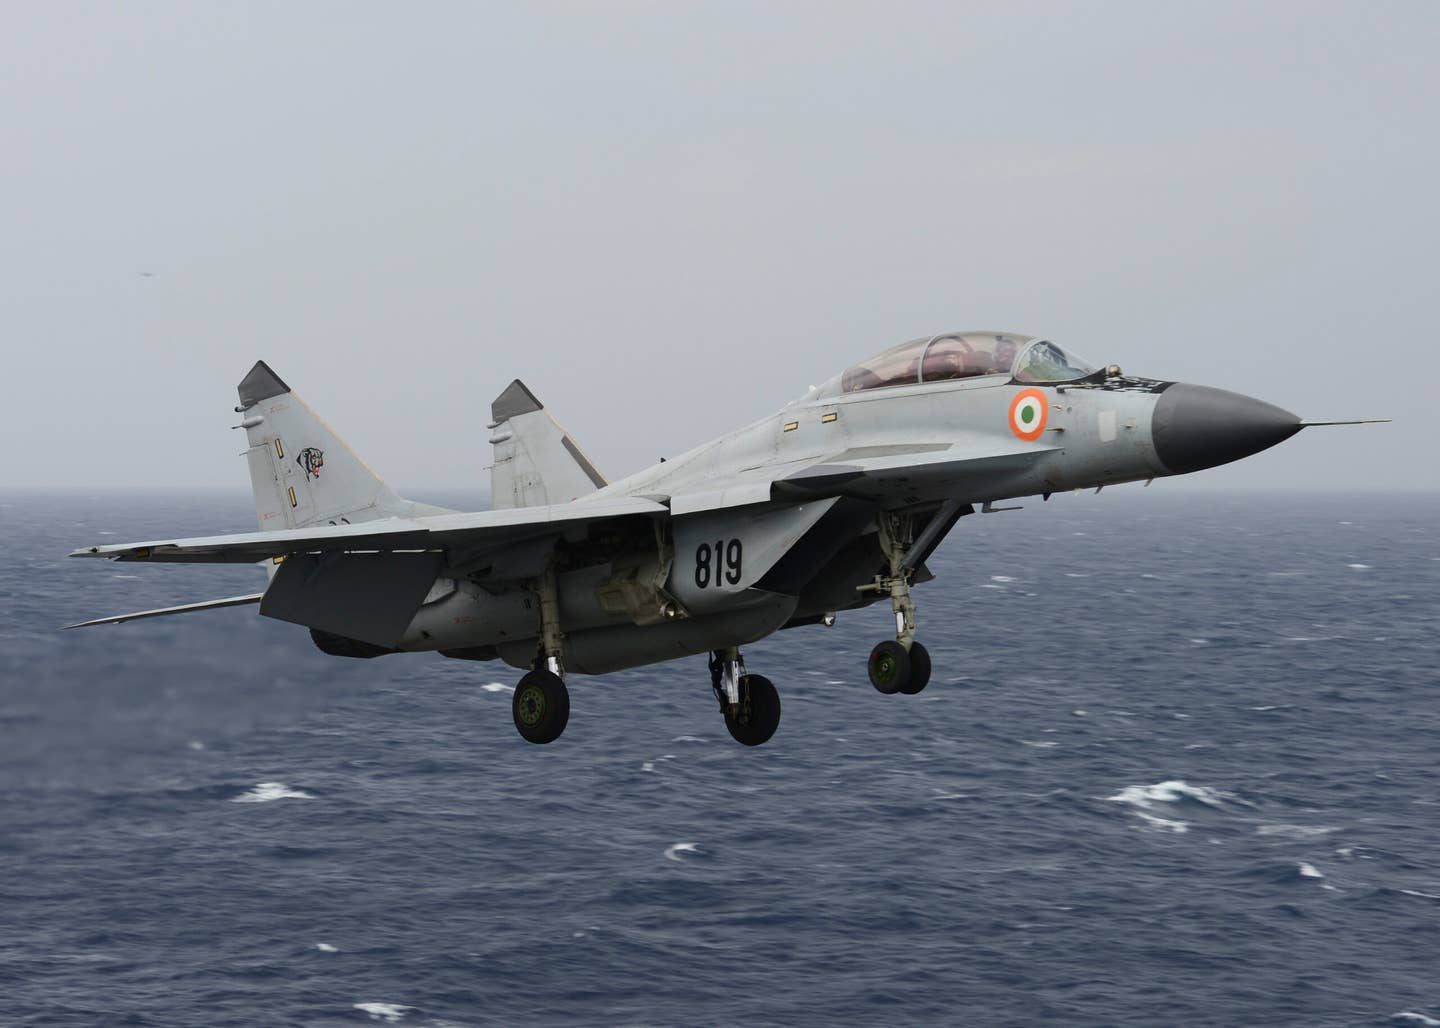 An Indian Navy MiG-29K flies over the aircraft carrier USS <em>Nimitz</em> (CVN-68) during Exercise Malabar 2017. Note the rectangular LEVCONs deployed from the wing root extensions on the approach to the carrier. <em>U.S. Navy photo by Mass Communication Specialist 3rd Class Colby S. Comery/Released</em>